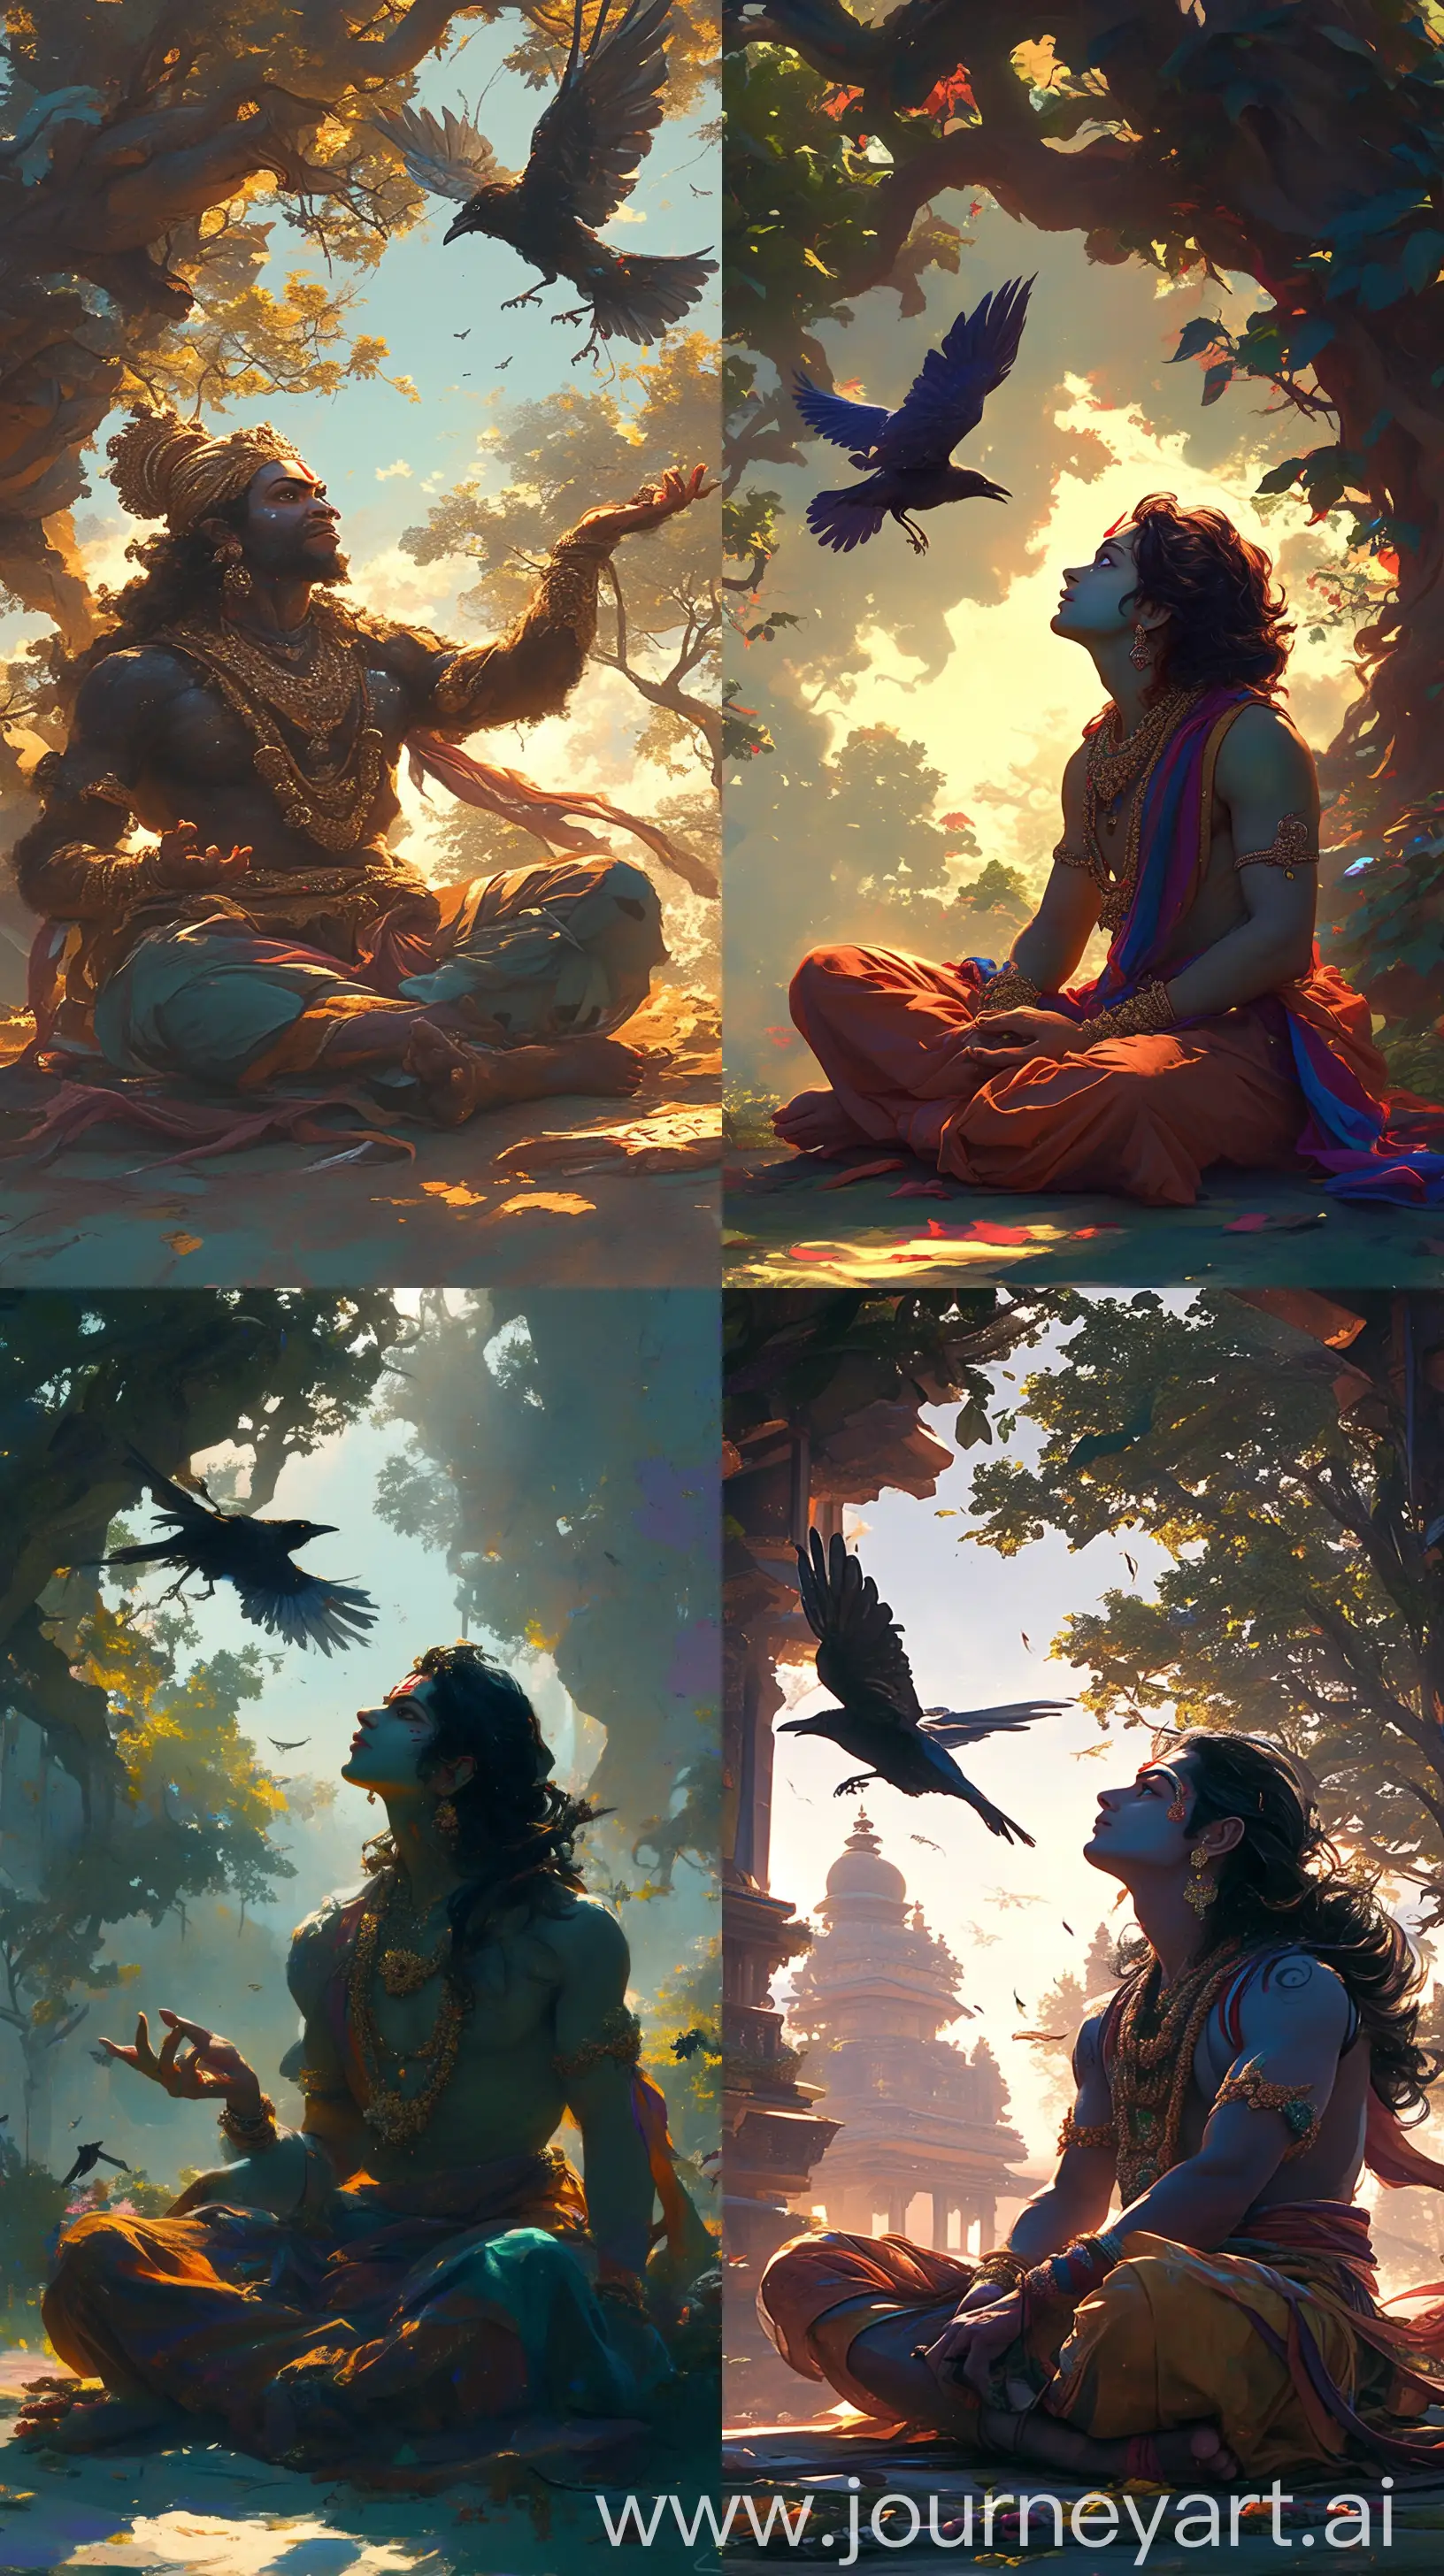 Lord-Ram-in-Ancient-Hindu-Attire-Observing-a-Crow-in-Ethereal-Morning-Light